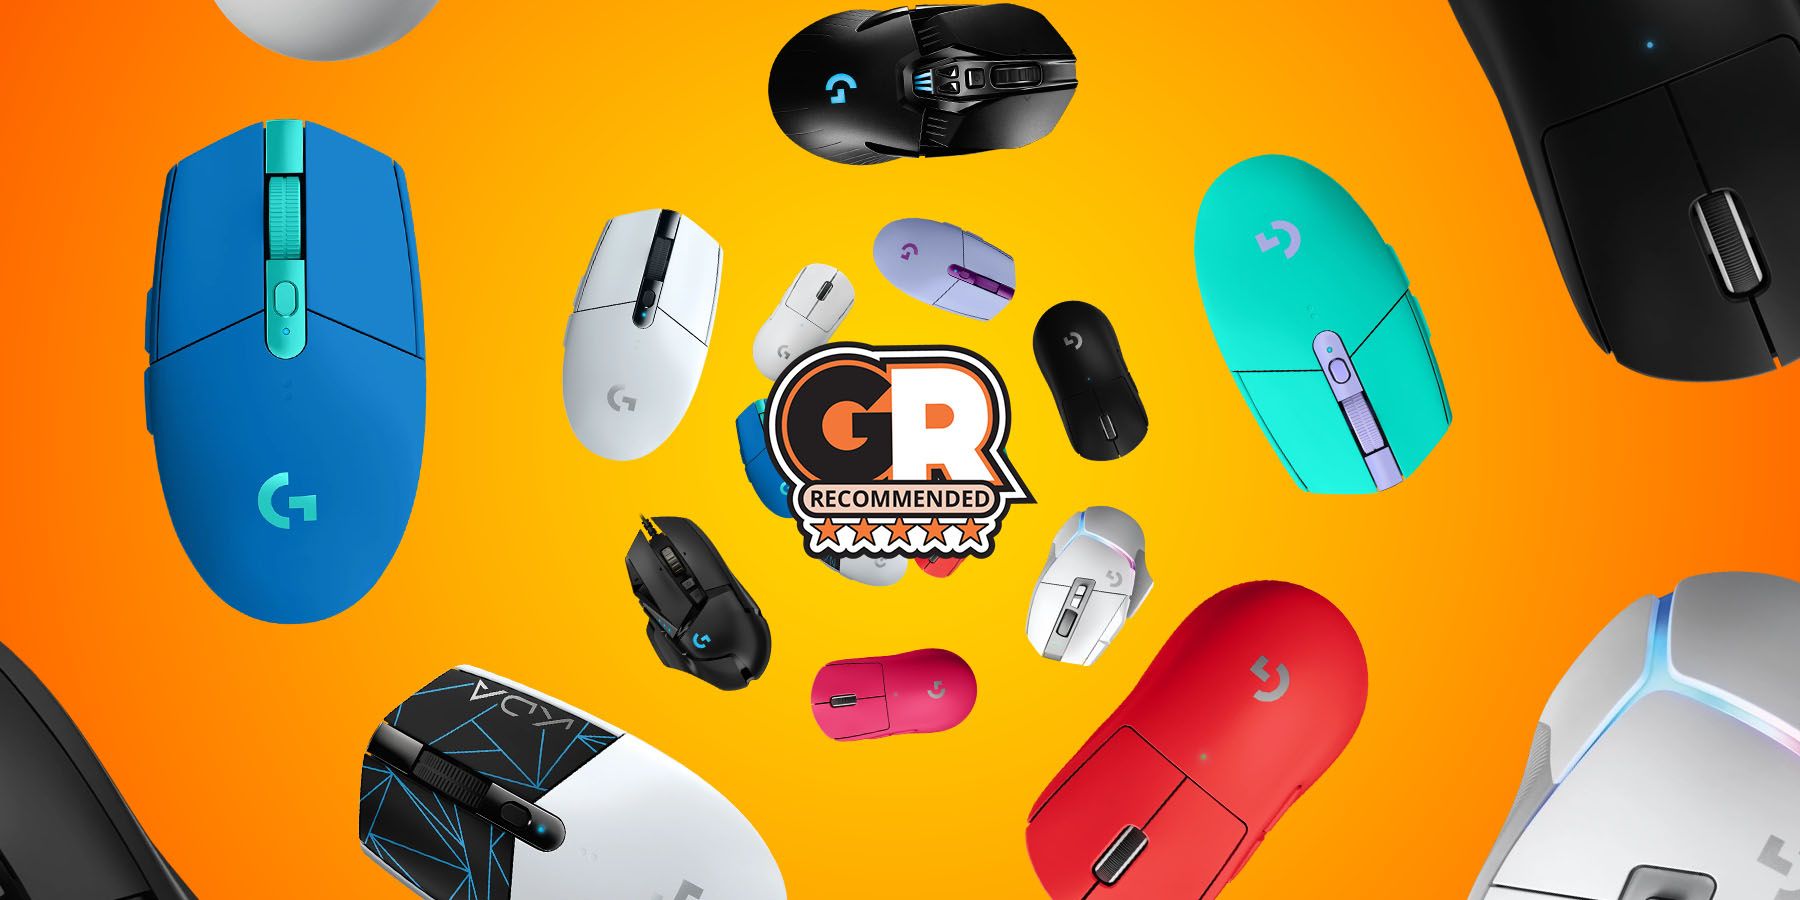 5 Best Logitech Gaming Mouse 